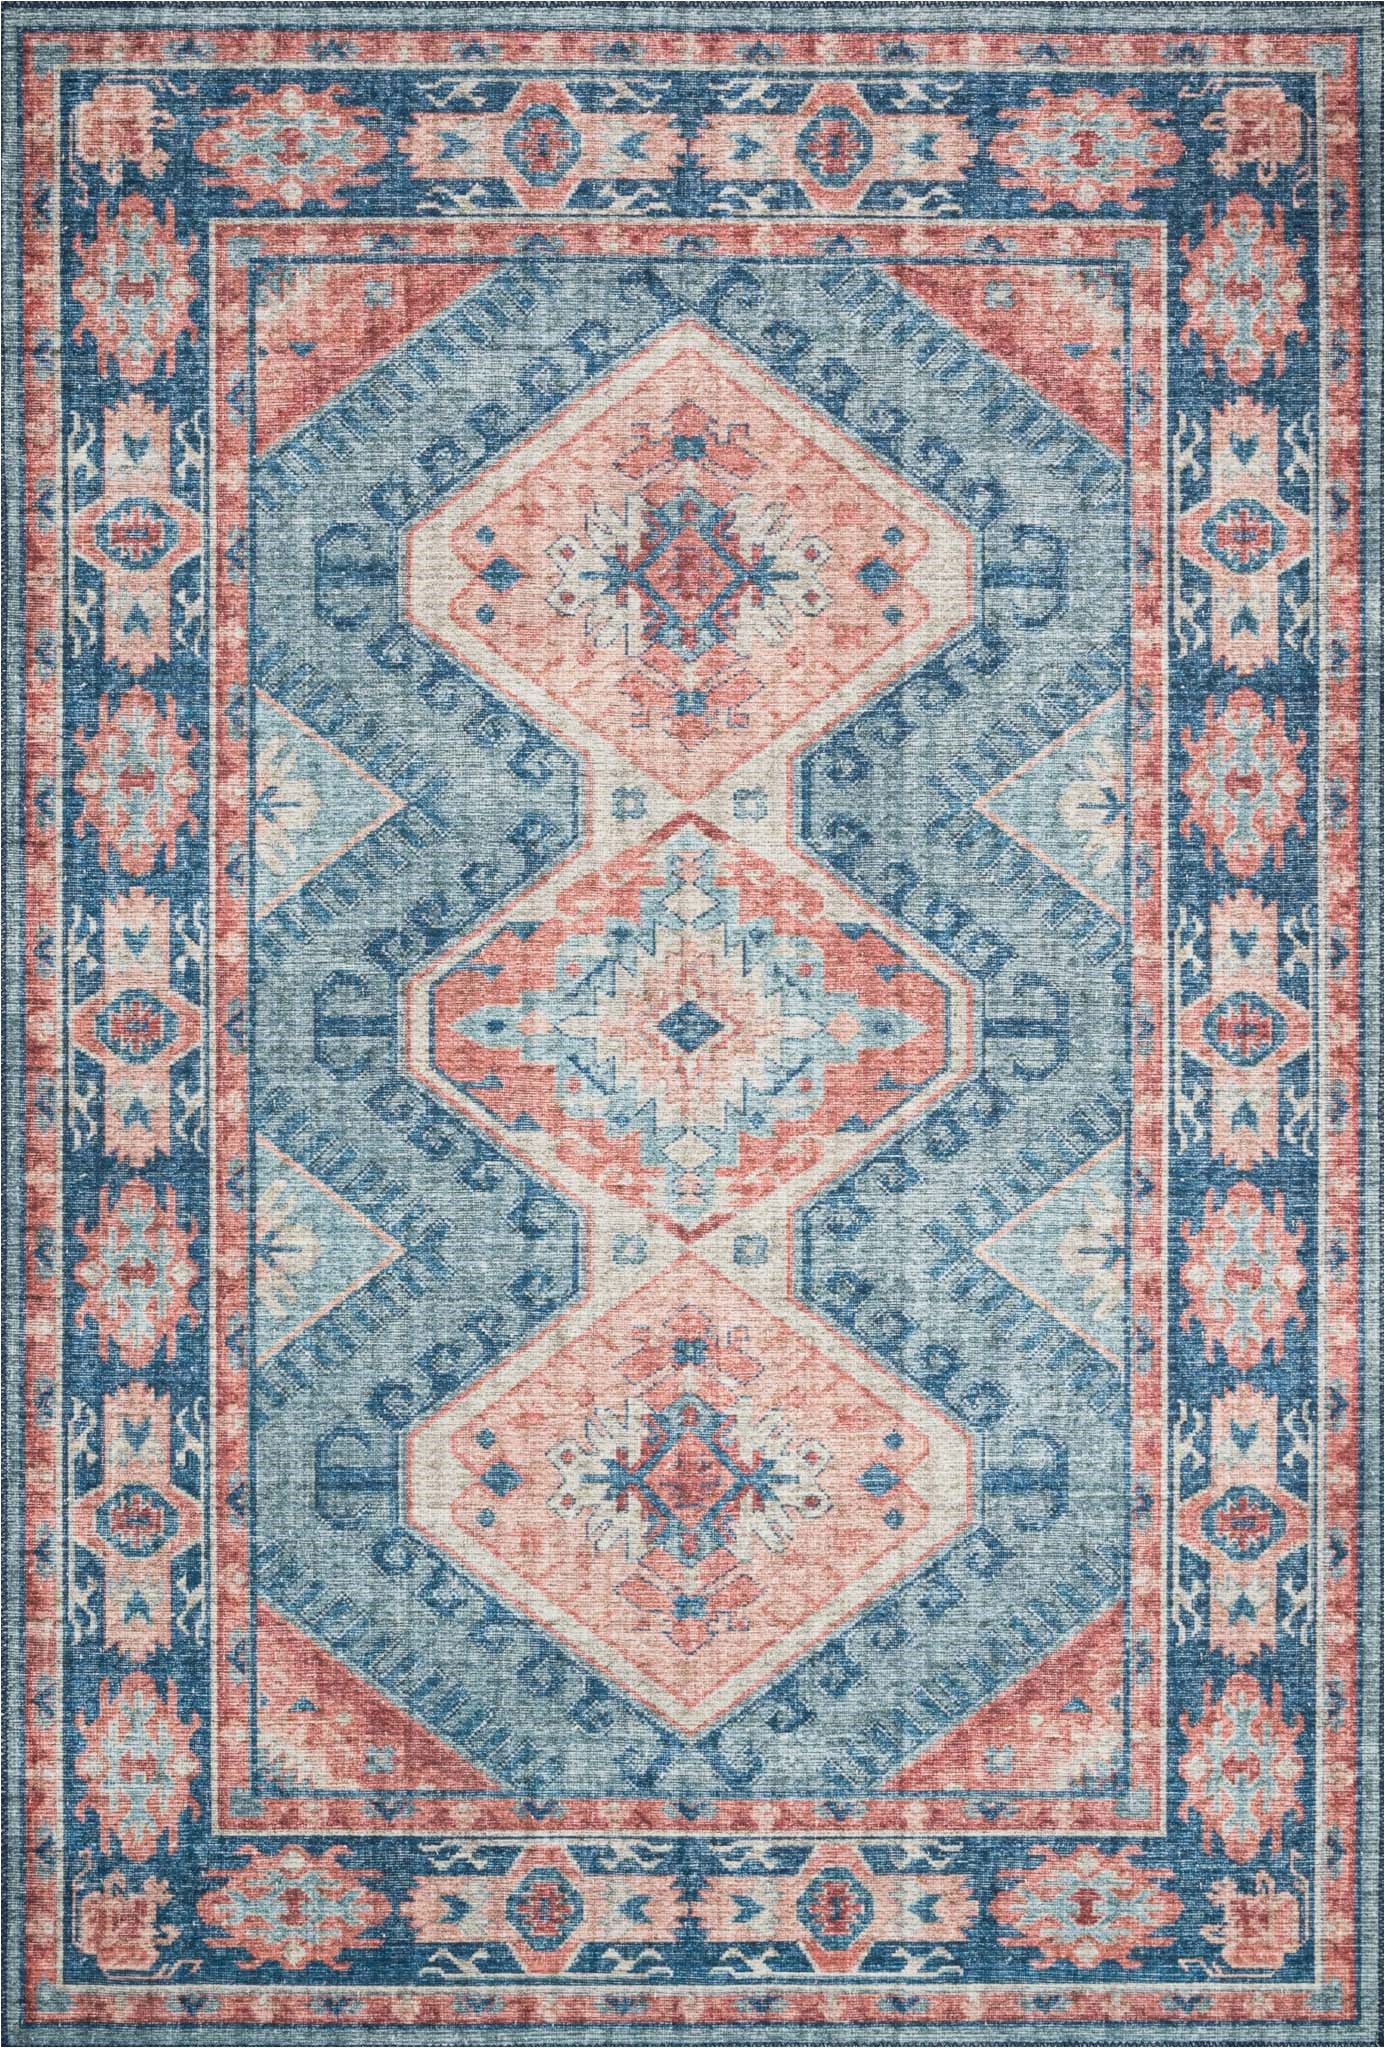 Terra Cotta Colored area Rugs Sky 03 Color Turquoise Terracotta Size 7 6" X 9 6